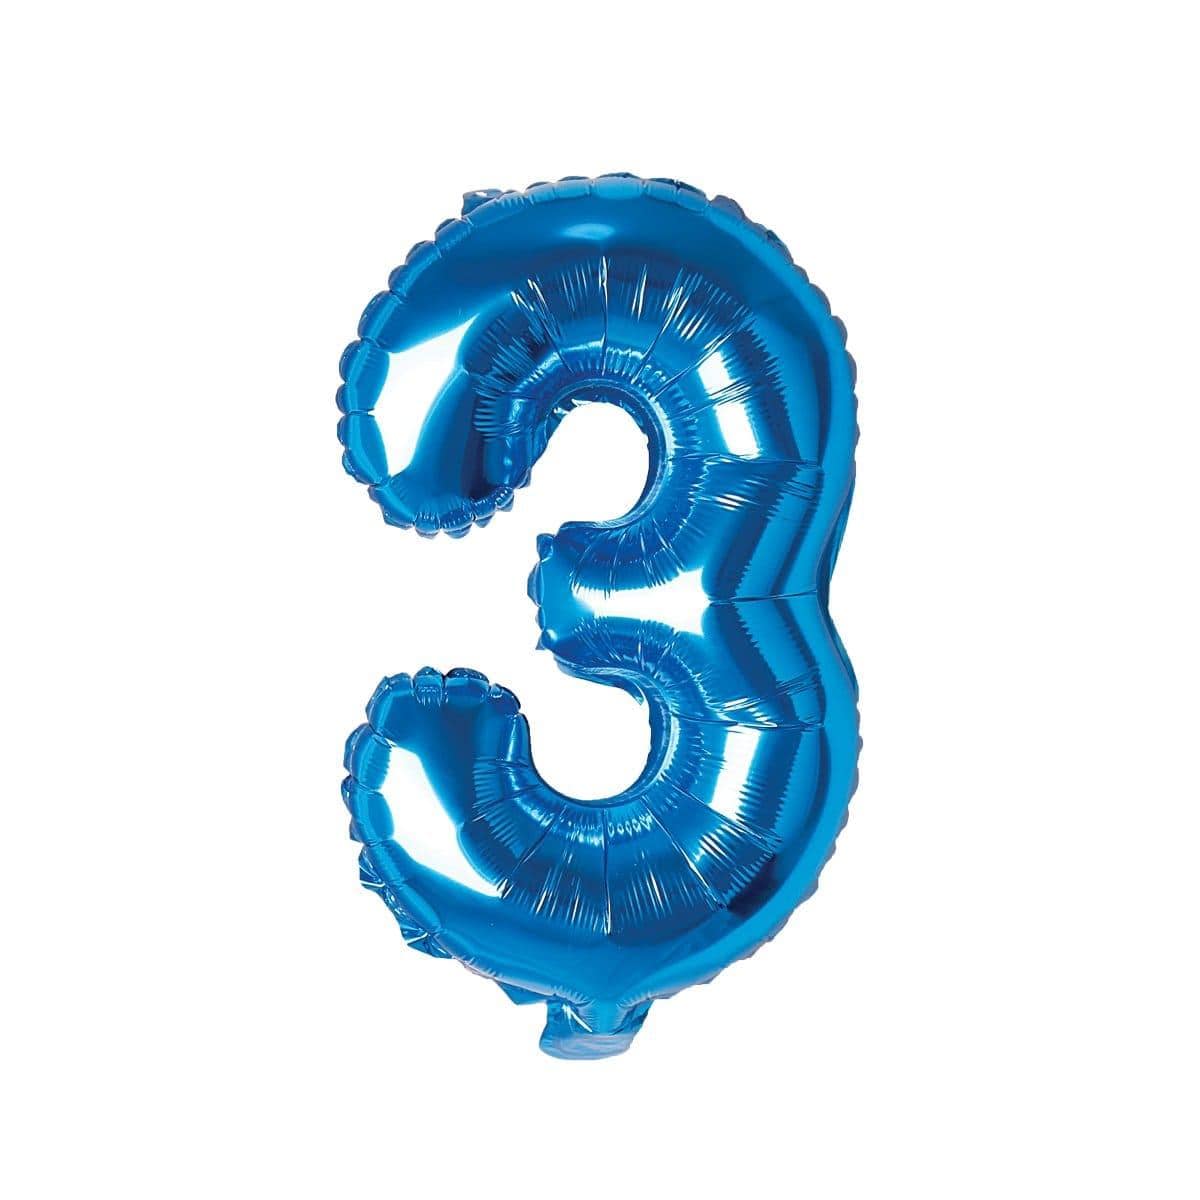 Buy Balloons Blue Number 3 Foil Balloon, 16 Inches sold at Party Expert